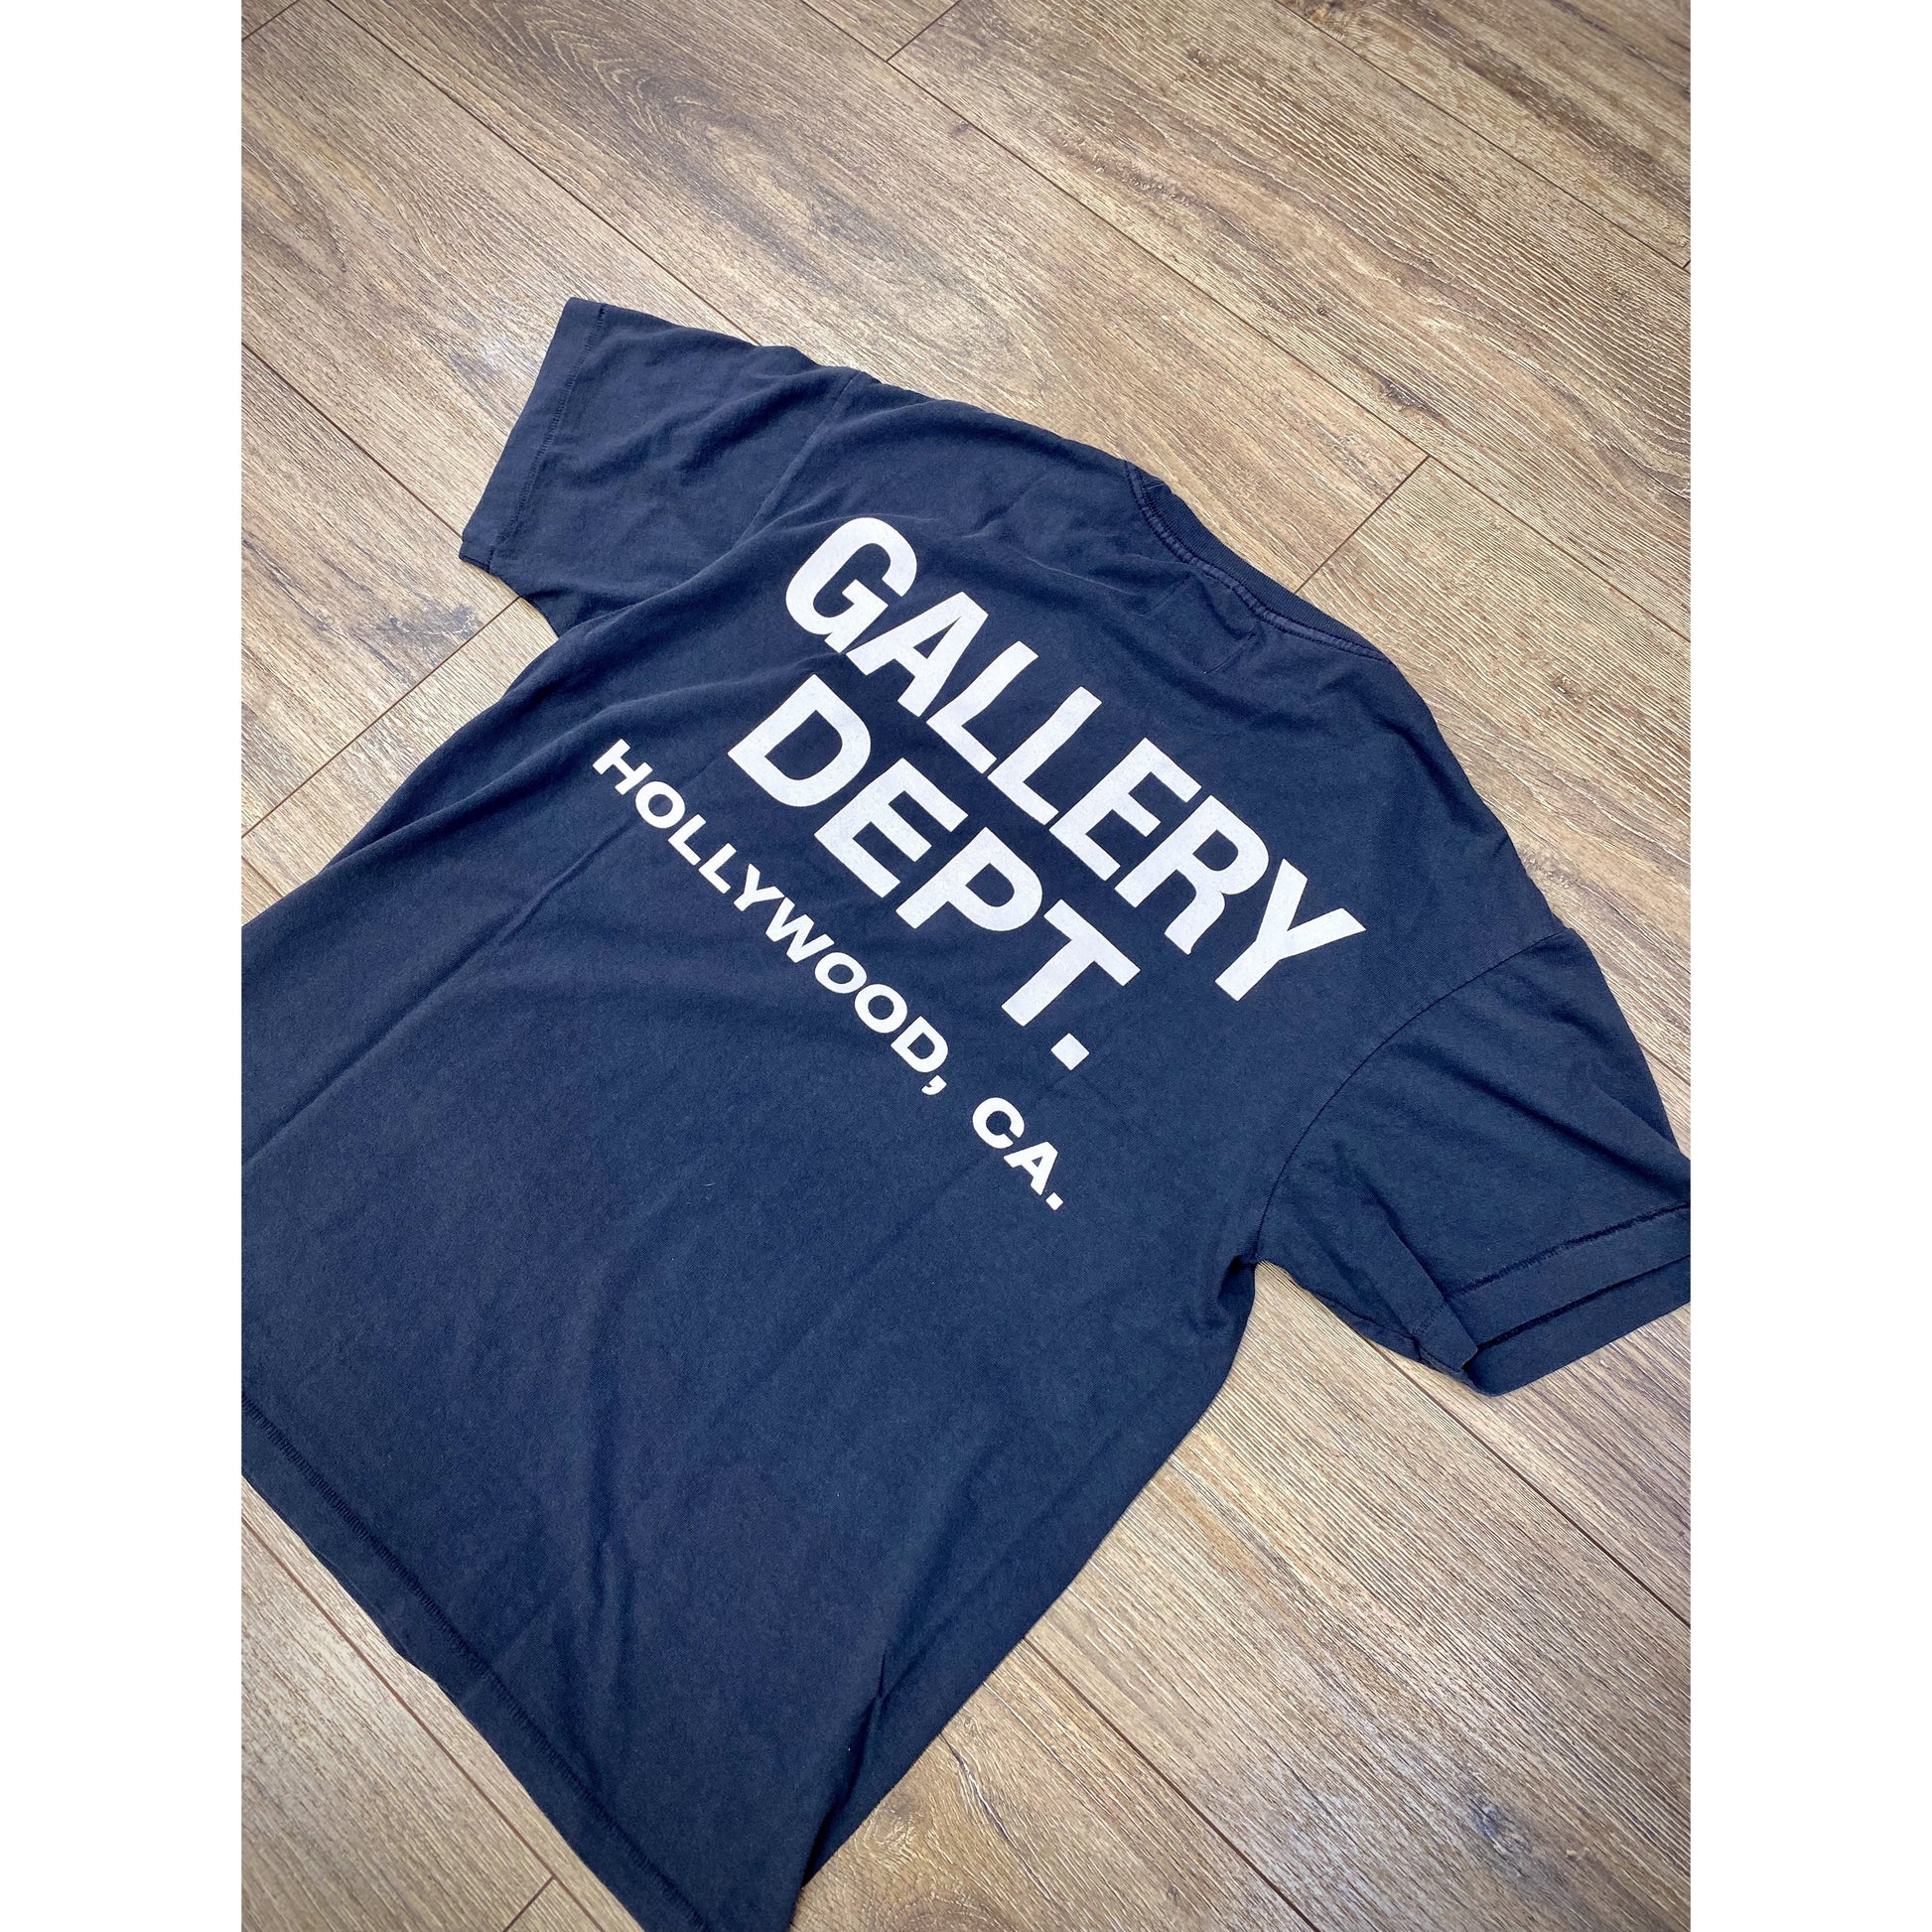 Gallery Dept. Vintage Souvenir T-Shirt NAVY by GALLERY DEPT. from £200.99